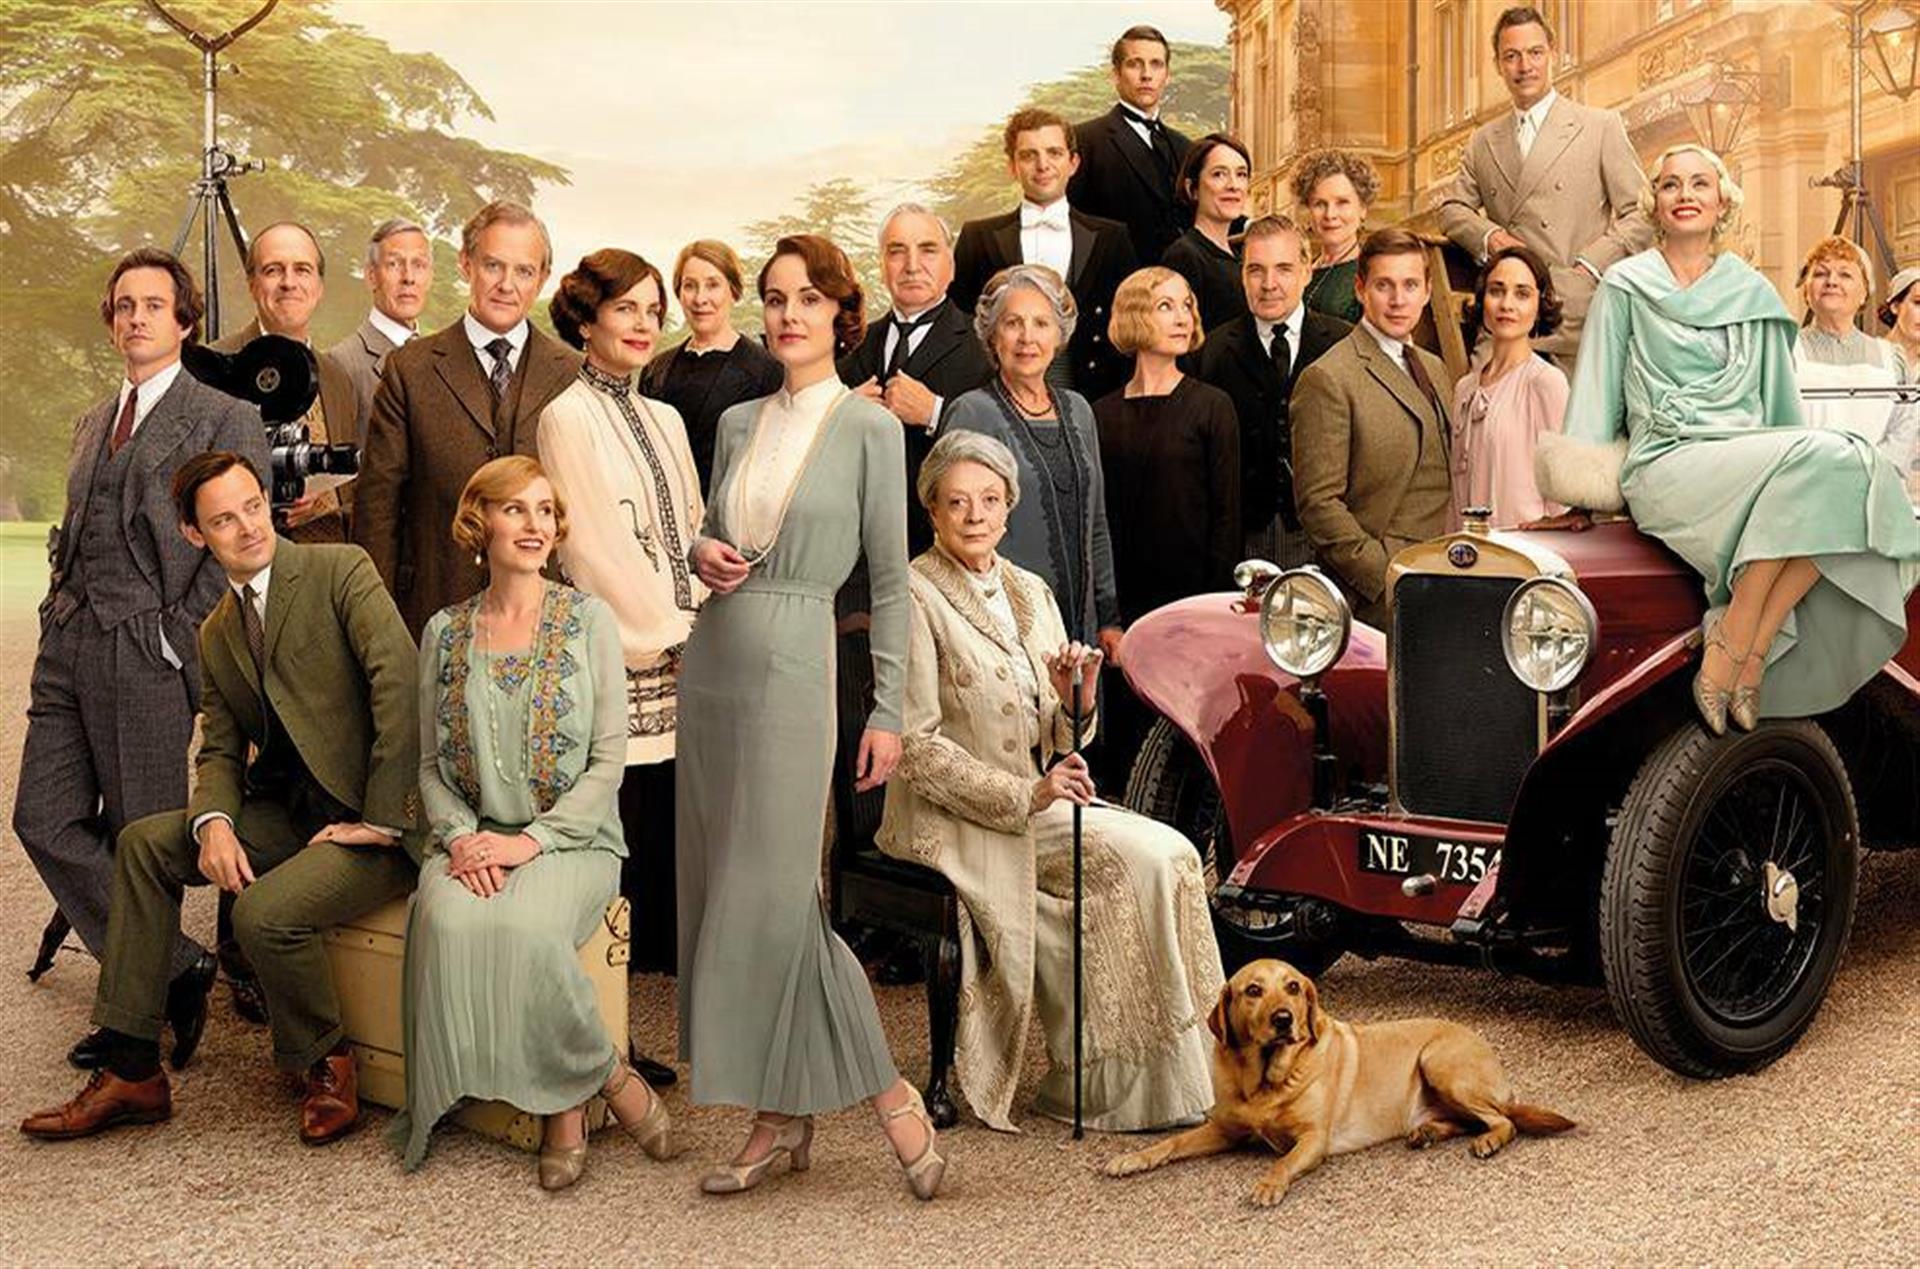 Lowther Cinema: Downton Abbey: A New Era (PG) - Lowther Pavilion